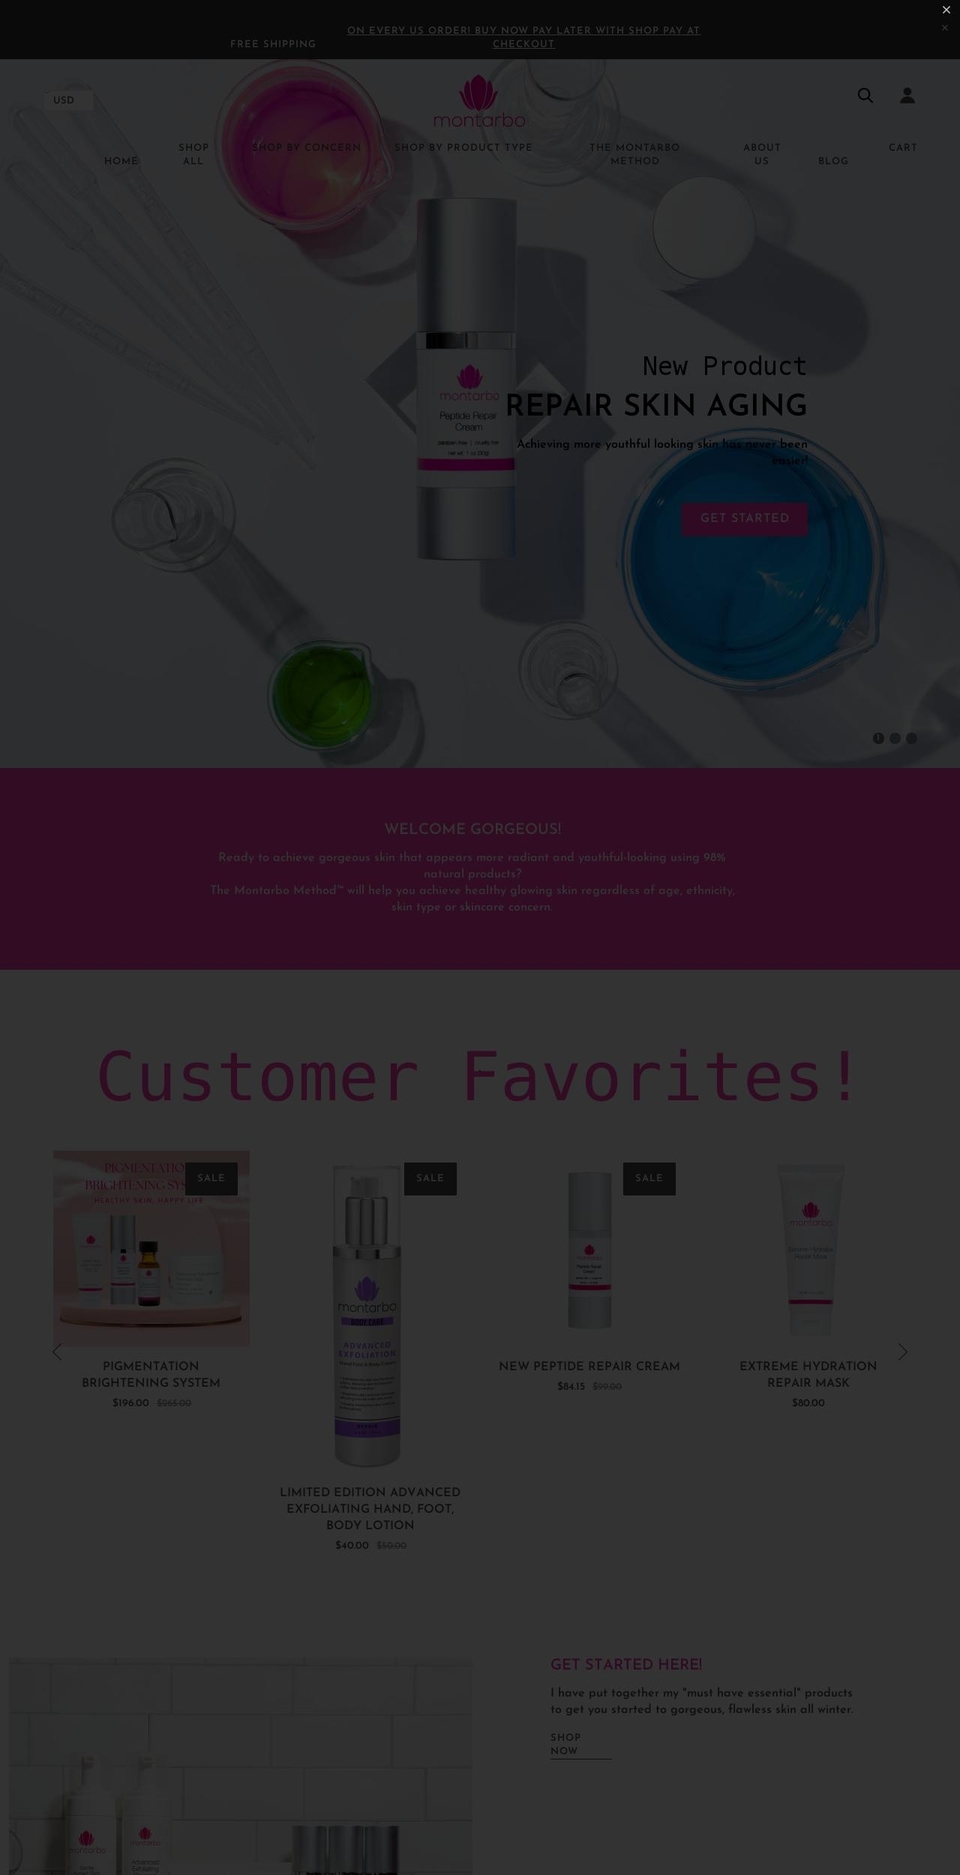 Beaux Shopify theme site example montarboskincarestore.com